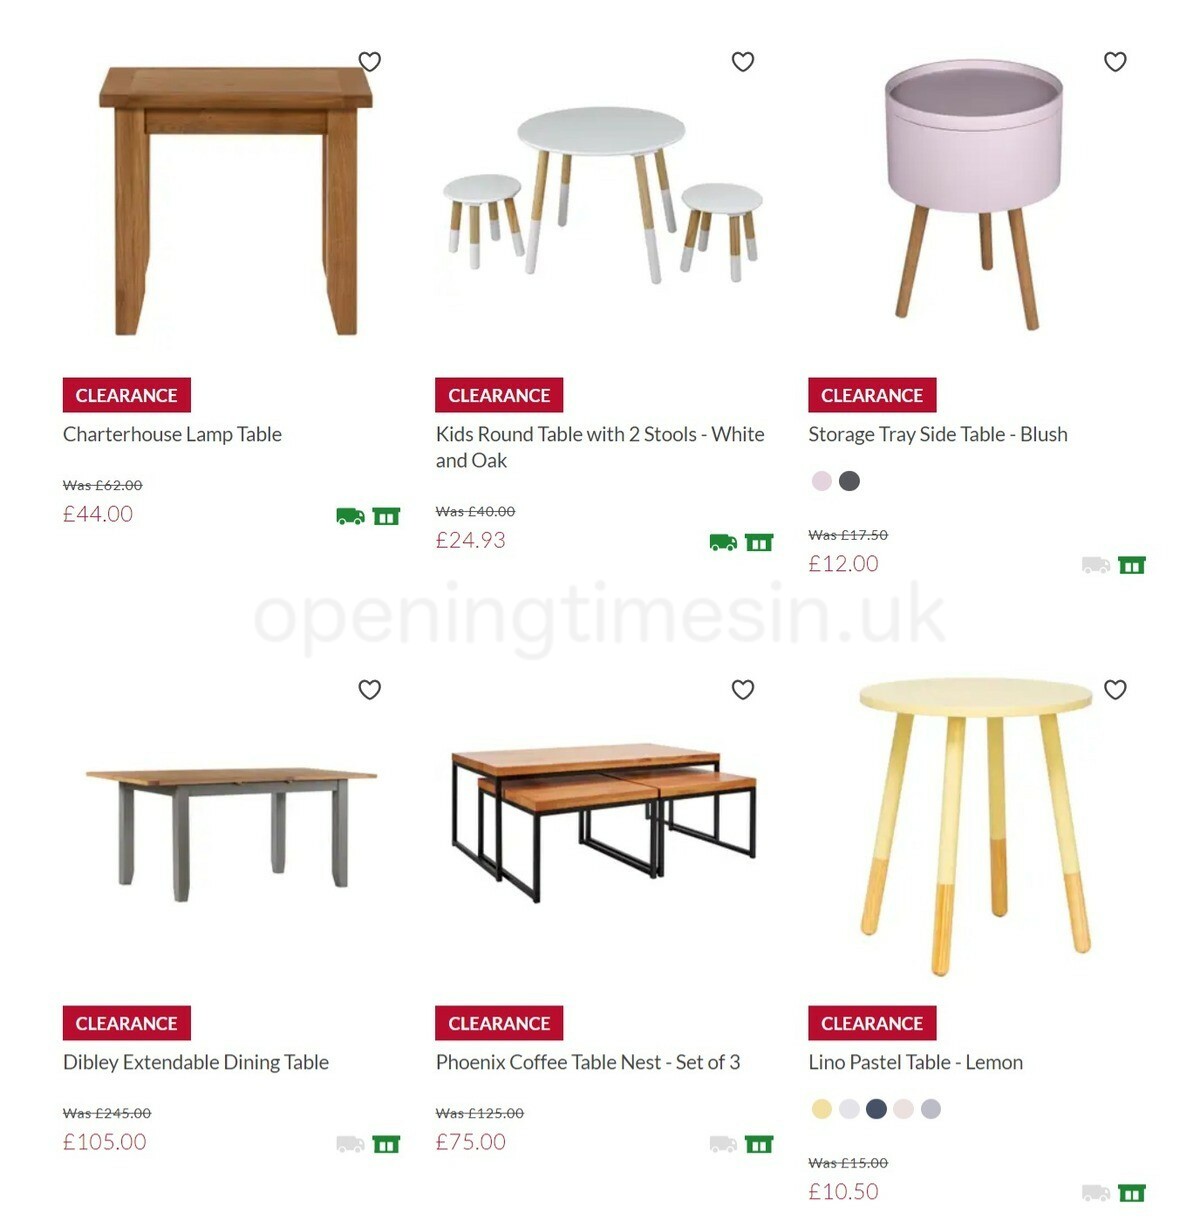 Homebase Offers from 8 April